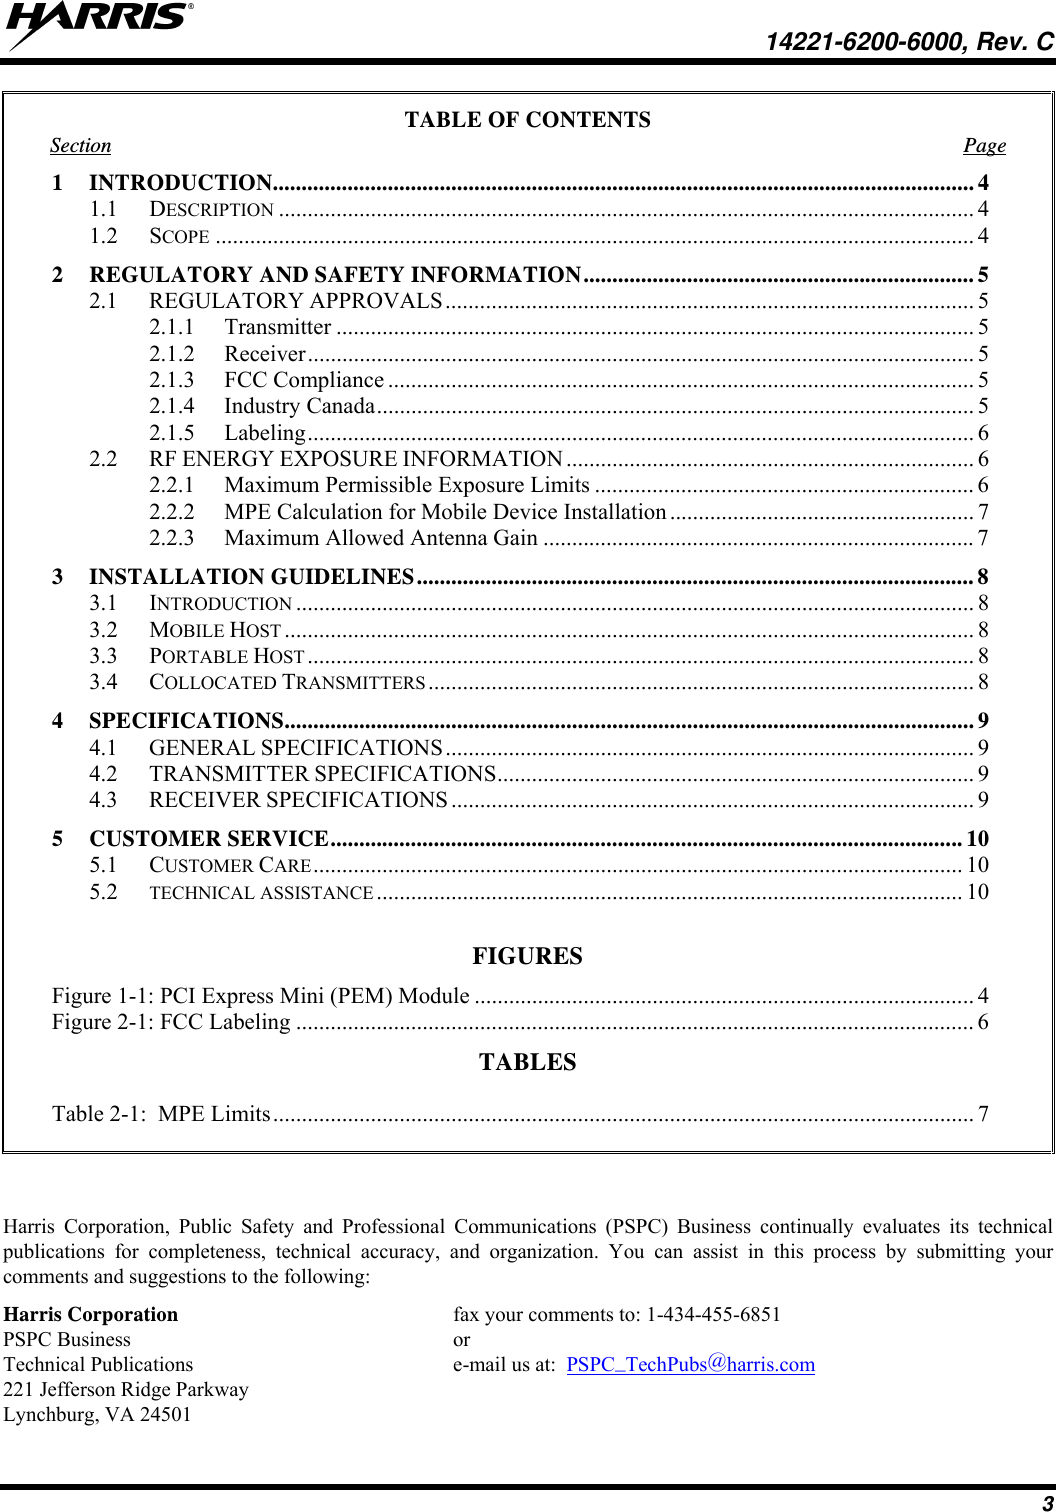   14221-6200-6000, Rev. C 3 TABLE OF CONTENTS Section Page 1 INTRODUCTION .......................................................................................................................... 4 1.1 DESCRIPTION ......................................................................................................................... 4 1.2 SCOPE .................................................................................................................................... 4 2  REGULATORY AND SAFETY INFORMATION .................................................................... 5 2.1 REGULATORY APPROVALS ............................................................................................ 5 2.1.1 Transmitter ............................................................................................................... 5 2.1.2 Receiver .................................................................................................................... 5 2.1.3 FCC Compliance ...................................................................................................... 5 2.1.4 Industry Canada ........................................................................................................ 5 2.1.5 Labeling .................................................................................................................... 6 2.2 RF ENERGY EXPOSURE INFORMATION ....................................................................... 6 2.2.1  Maximum Permissible Exposure Limits .................................................................. 6 2.2.2  MPE Calculation for Mobile Device Installation ..................................................... 7 2.2.3  Maximum Allowed Antenna Gain ........................................................................... 7 3 INSTALLATION GUIDELINES ................................................................................................. 8 3.1 INTRODUCTION ...................................................................................................................... 8 3.2 MOBILE HOST ........................................................................................................................ 8 3.3 PORTABLE HOST .................................................................................................................... 8 3.4 COLLOCATED TRANSMITTERS ............................................................................................... 8 4 SPECIFICATIONS ........................................................................................................................ 9 4.1 GENERAL SPECIFICATIONS ............................................................................................ 9 4.2 TRANSMITTER SPECIFICATIONS ...................................................................................  9 4.3 RECEIVER SPECIFICATIONS ........................................................................................... 9 5 CUSTOMER SERVICE .............................................................................................................. 10 5.1 CUSTOMER CARE ................................................................................................................. 10 5.2  TECHNICAL ASSISTANCE ...................................................................................................... 10  FIGURES Figure 1-1: PCI Express Mini (PEM) Module ....................................................................................... 4Figure 2-1: FCC Labeling ...................................................................................................................... 6TABLES    Table 2-1:  MPE Limits .......................................................................................................................... 7   Harris Corporation, Public Safety and Professional Communications (PSPC) Business continually evaluates its technical publications for completeness, technical accuracy, and organization. You can assist in this process by submitting your comments and suggestions to the following: Harris Corporation    fax your comments to: 1-434-455-6851 PSPC Business    or Technical Publications    e-mail us at:  PSPC_TechPubs@harris.com 221 Jefferson Ridge Parkway Lynchburg, VA 24501 